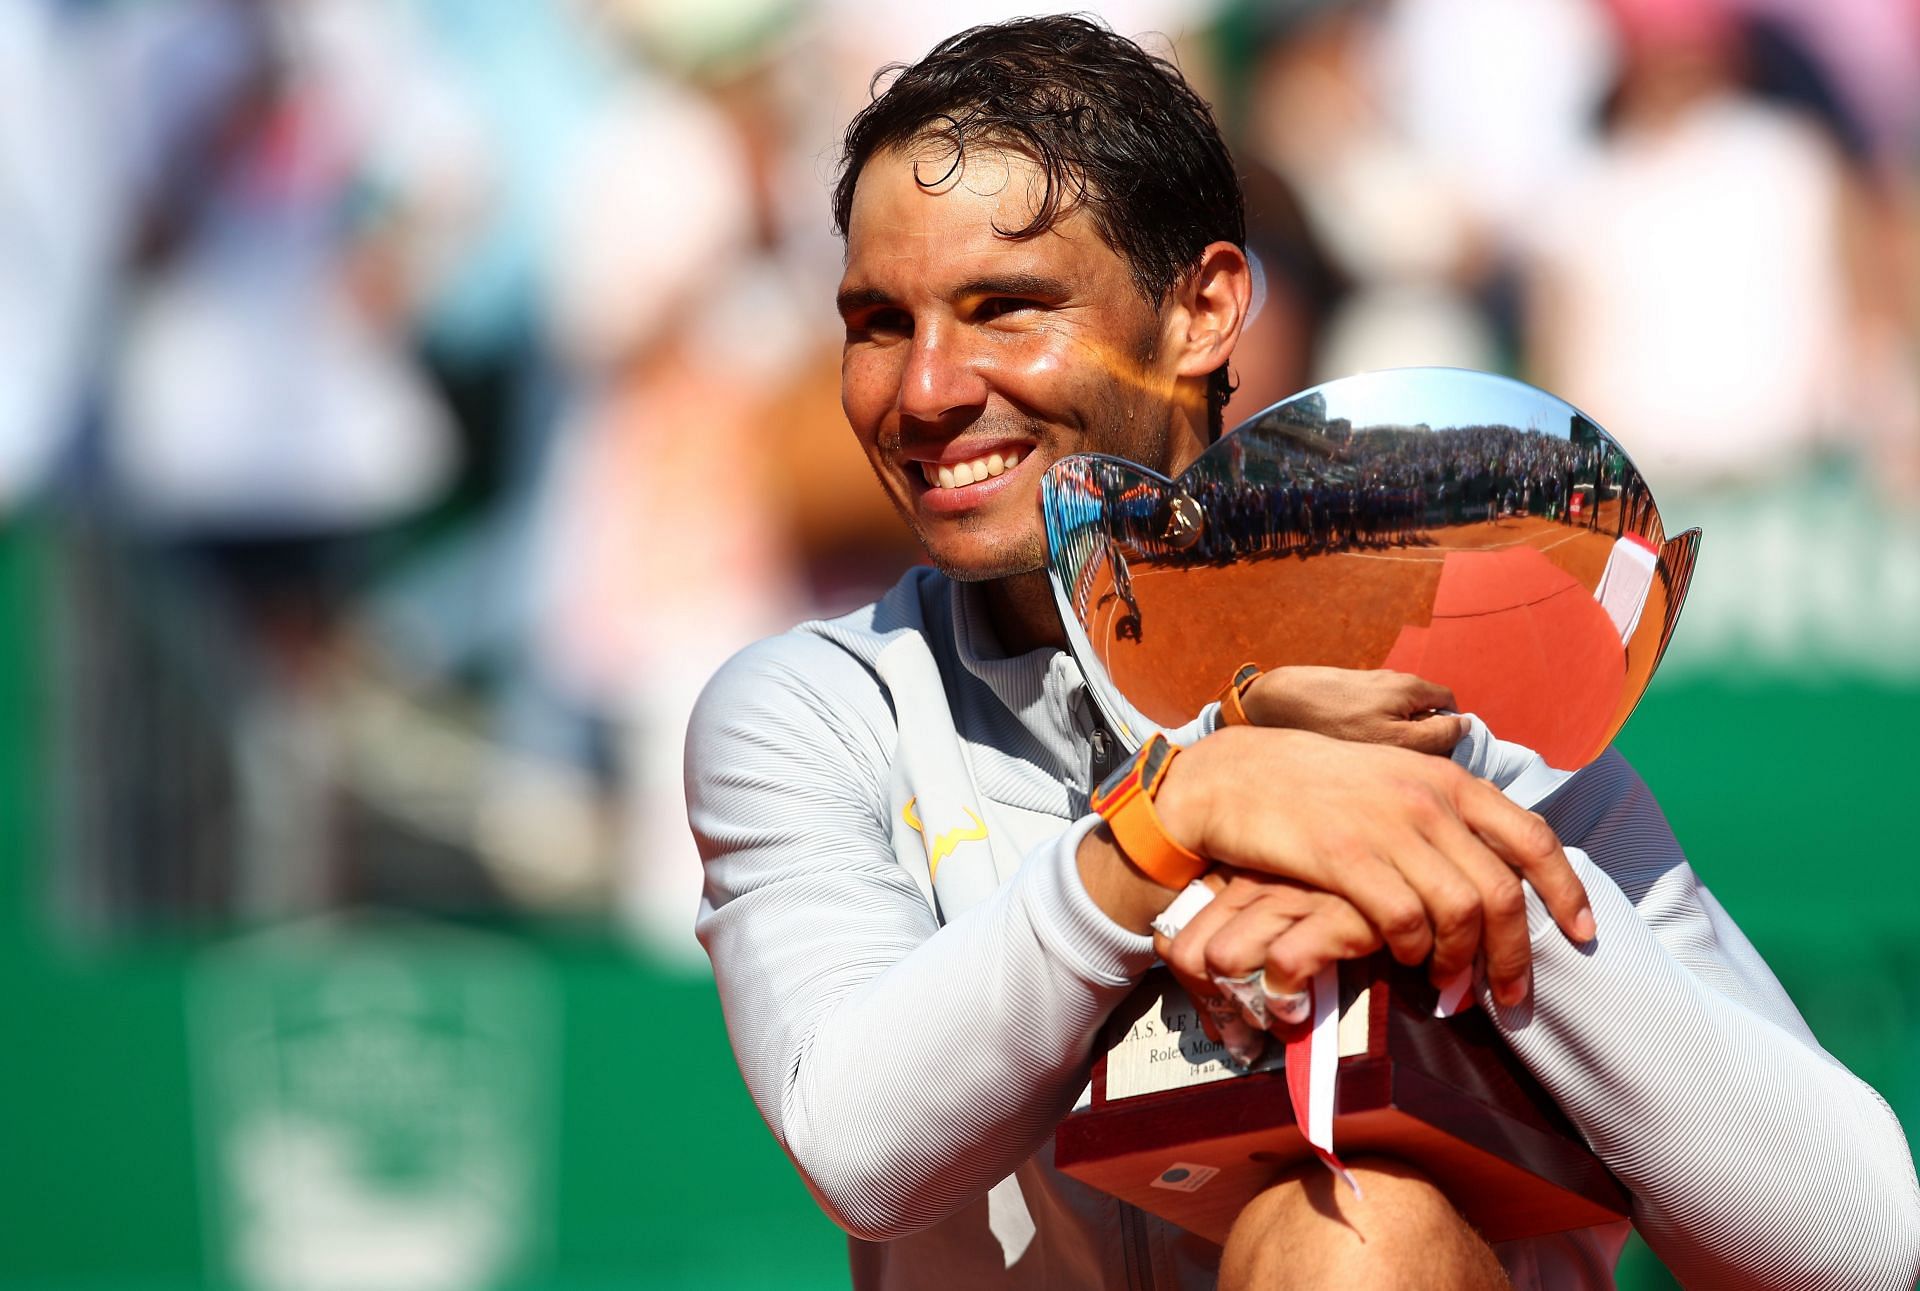 The Spaniard is a 11-time Monte Carlo Masters champion